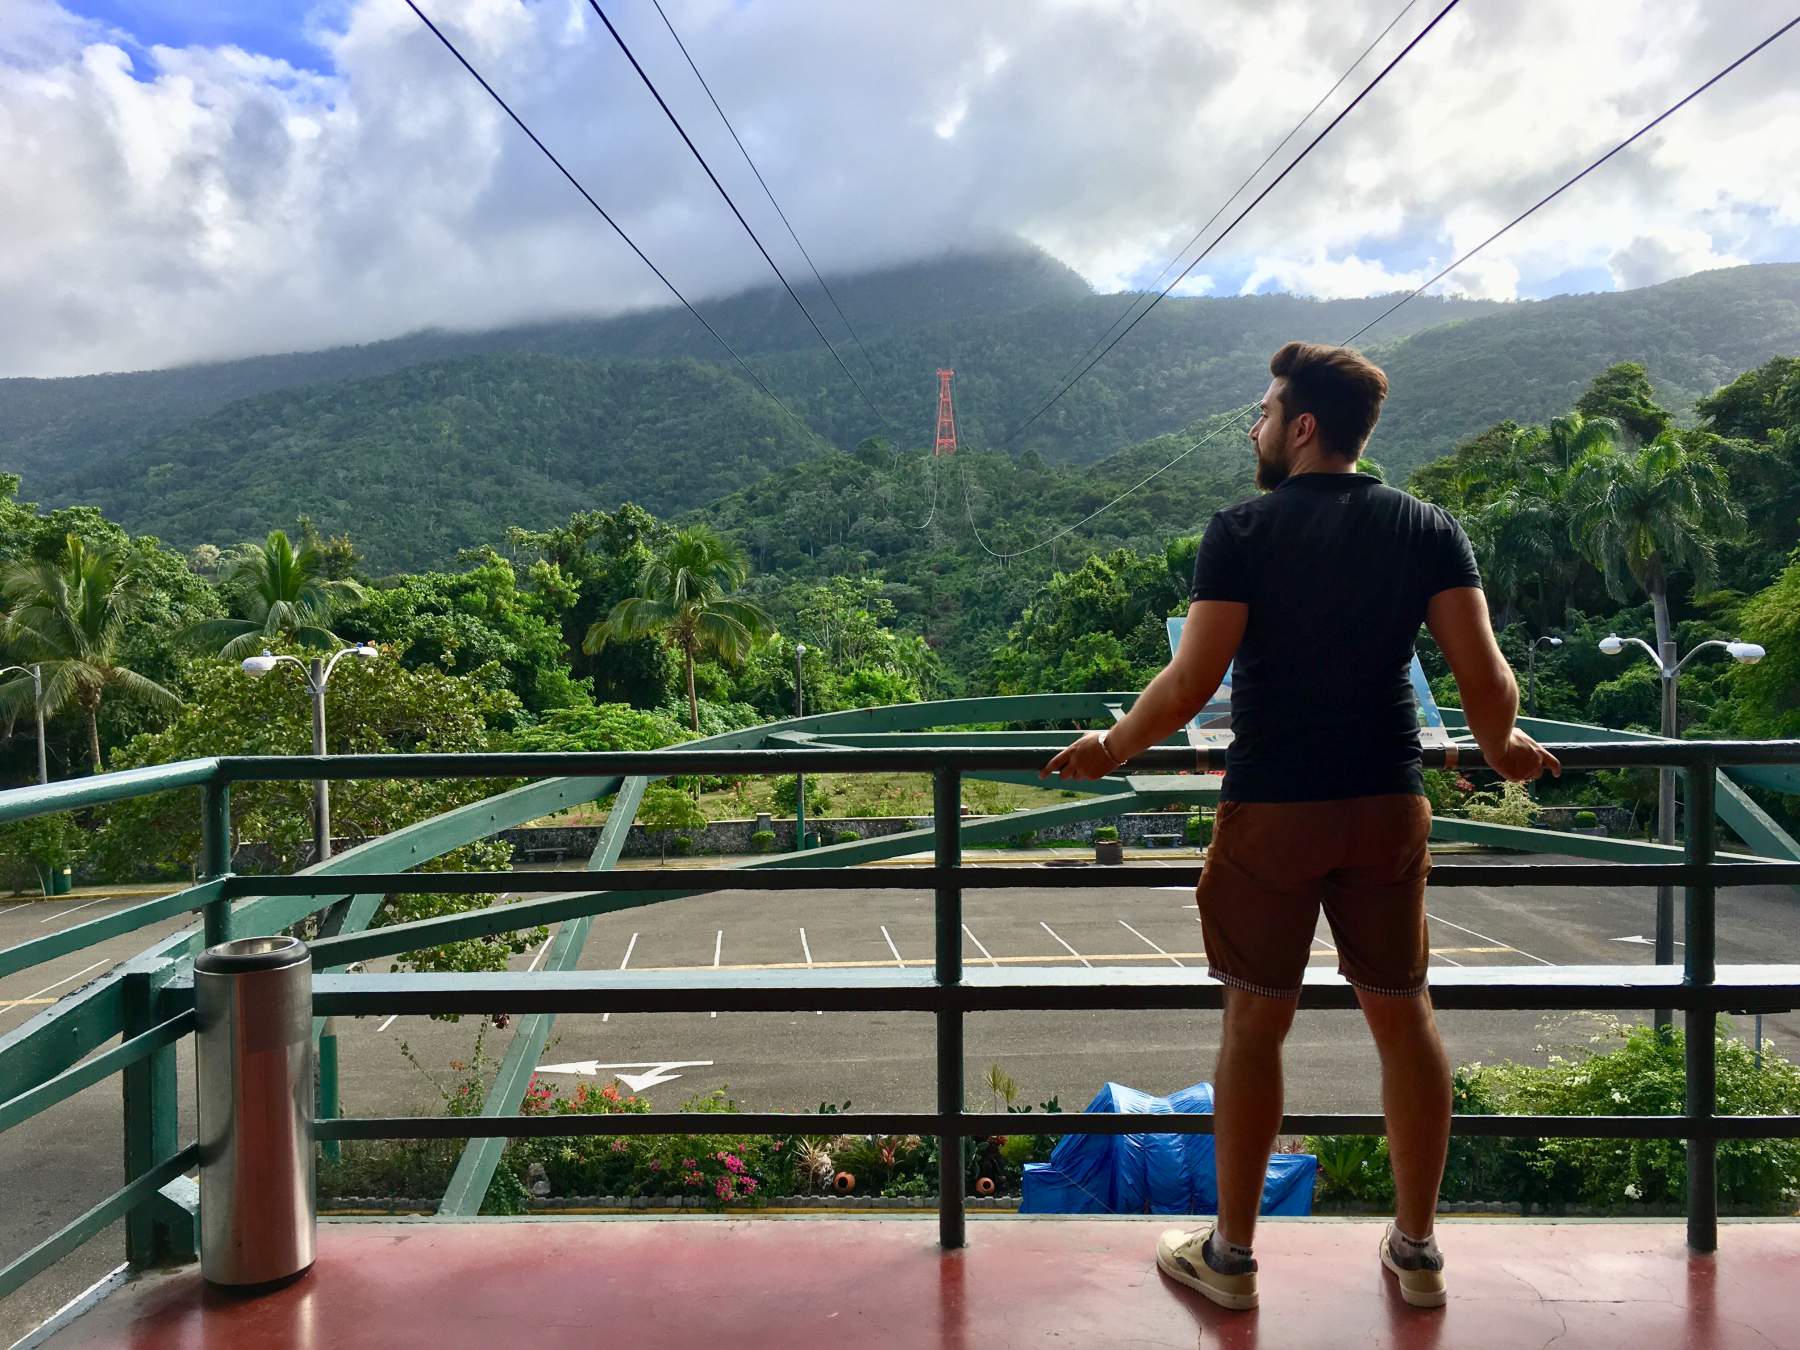 Waiting for the cable car in Puerto Plata, Dominican Republic